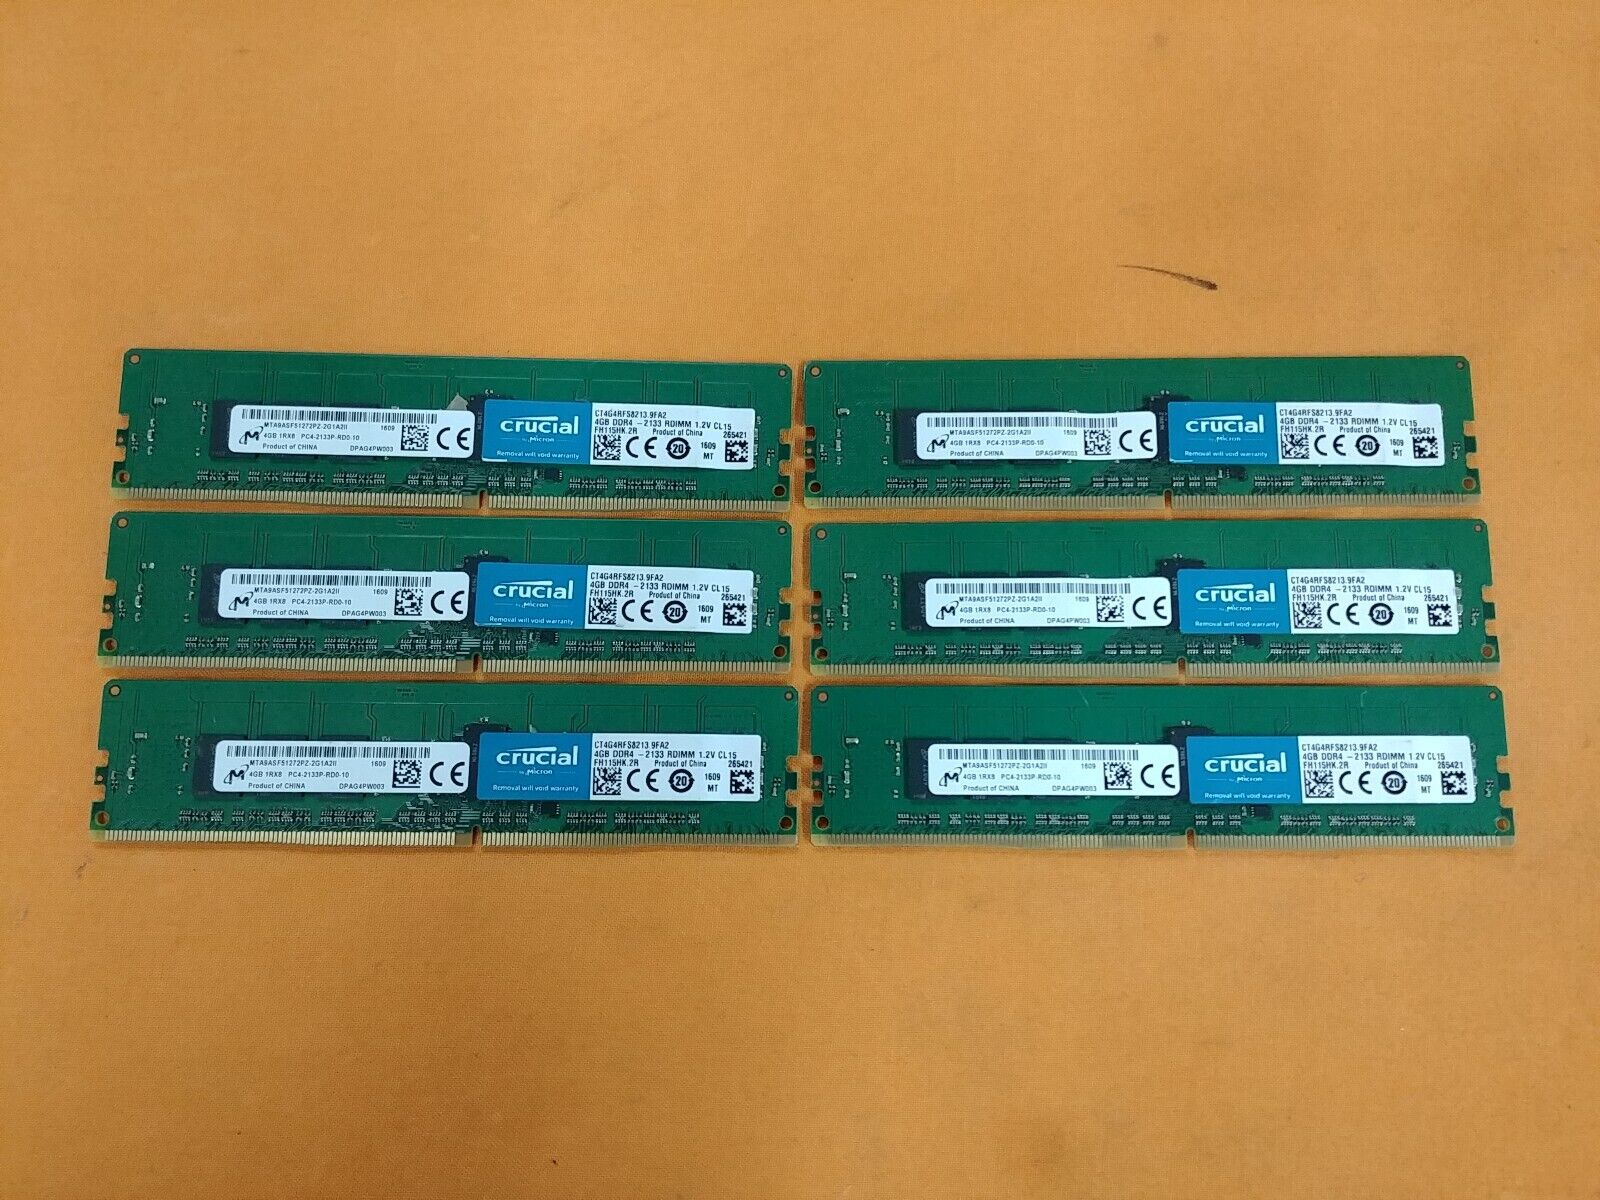 Lot of 6 Crucial 4GB RAM CT4G4DFS8213 PC4 2133MHz DDR4